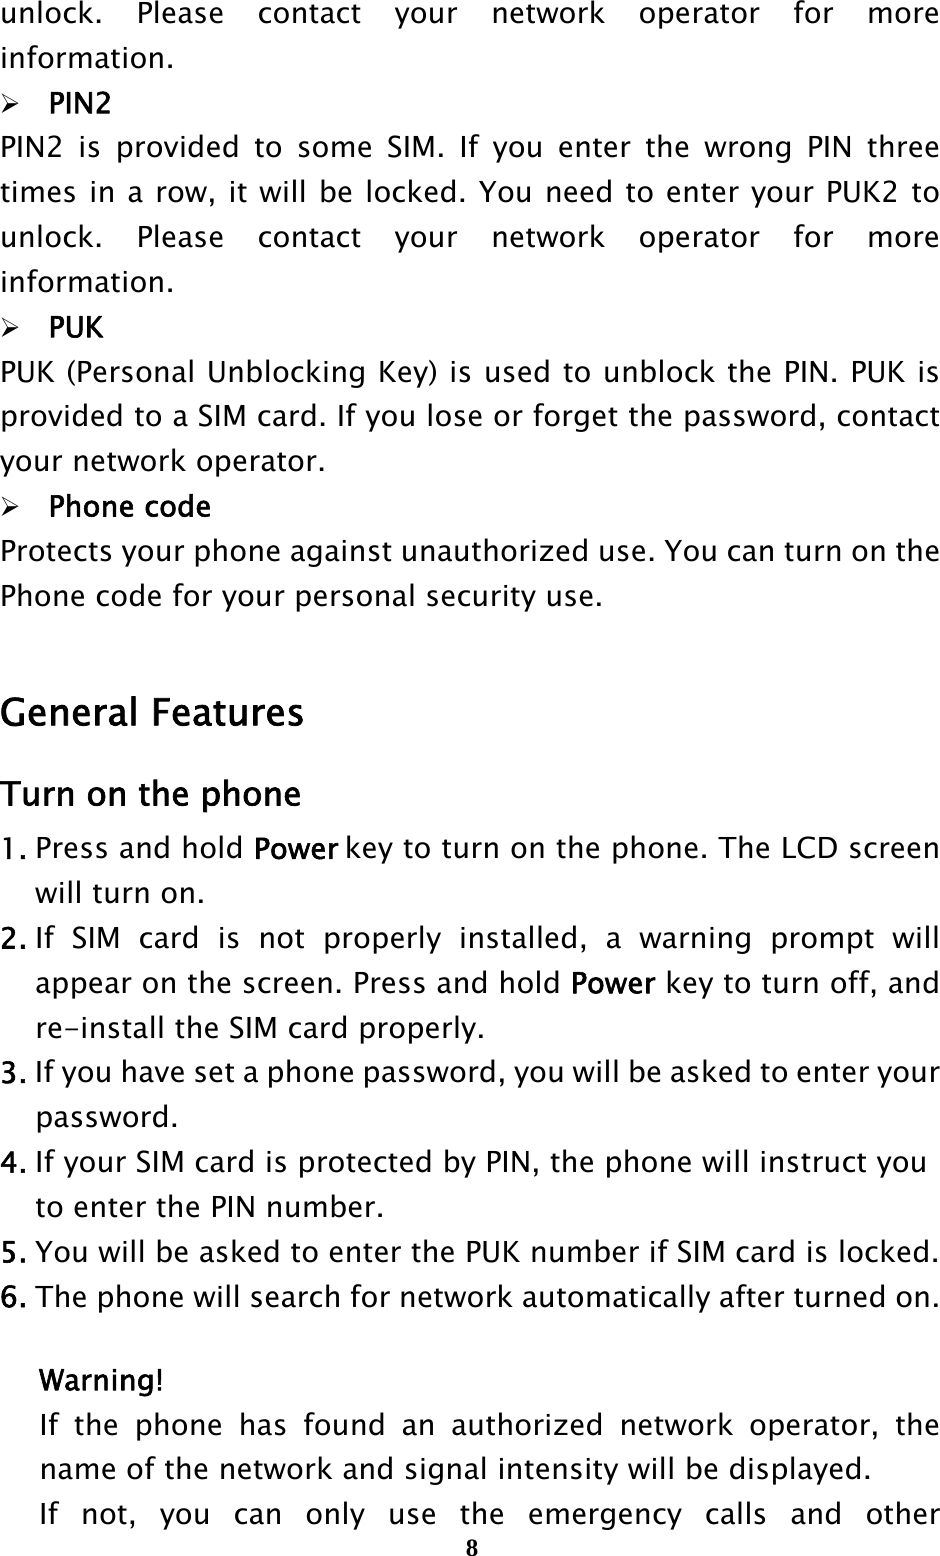  8unlock. Please contact your network operator for more information.  PIN2 PIN2 is provided to some SIM. If you enter the wrong PIN three times in a row, it will be locked. You need to enter your PUK2 to unlock. Please contact your network operator for more information.  PUK PUK (Personal Unblocking Key) is used to unblock the PIN. PUK is provided to a SIM card. If you lose or forget the password, contact your network operator.  Phone code Protects your phone against unauthorized use. You can turn on the Phone code for your personal security use.  General Features Turn on the phone 1. Press and hold Power key to turn on the phone. The LCD screen will turn on. 2. If SIM card is not properly installed, a warning prompt will appear on the screen. Press and hold Power key to turn off, and re-install the SIM card properly. 3. If you have set a phone password, you will be asked to enter your    password. 4. If your SIM card is protected by PIN, the phone will instruct you     to enter the PIN number. 5. You will be asked to enter the PUK number if SIM card is locked. 6. The phone will search for network automatically after turned on.  Warning! If the phone has found an authorized network operator, the name of the network and signal intensity will be displayed. If not, you can only use the emergency calls and other 